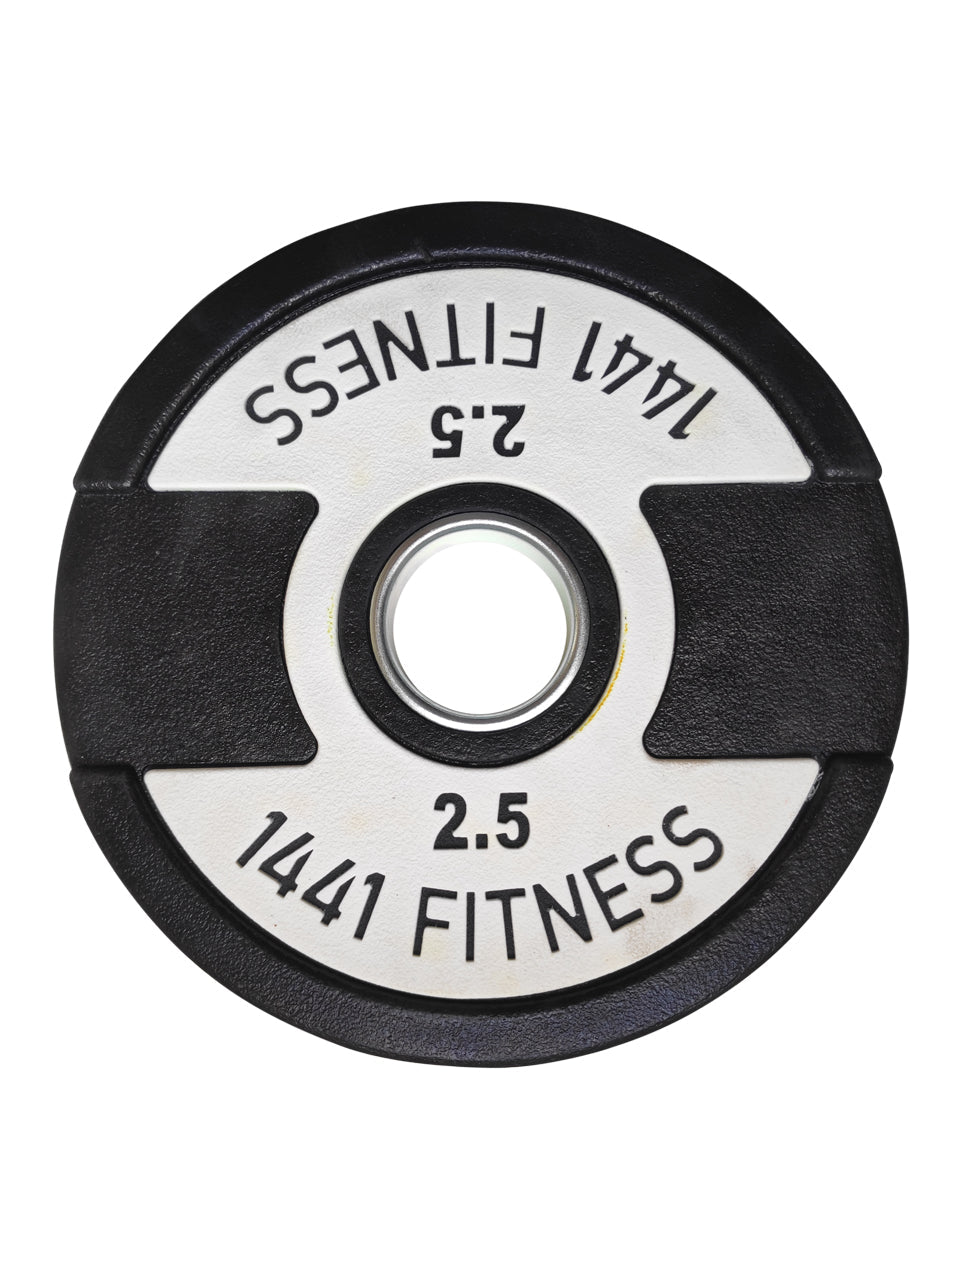 1441 Fitness7 Ft Olympic Barbell with Dual Grip Olympic Plates Set | 80 kg